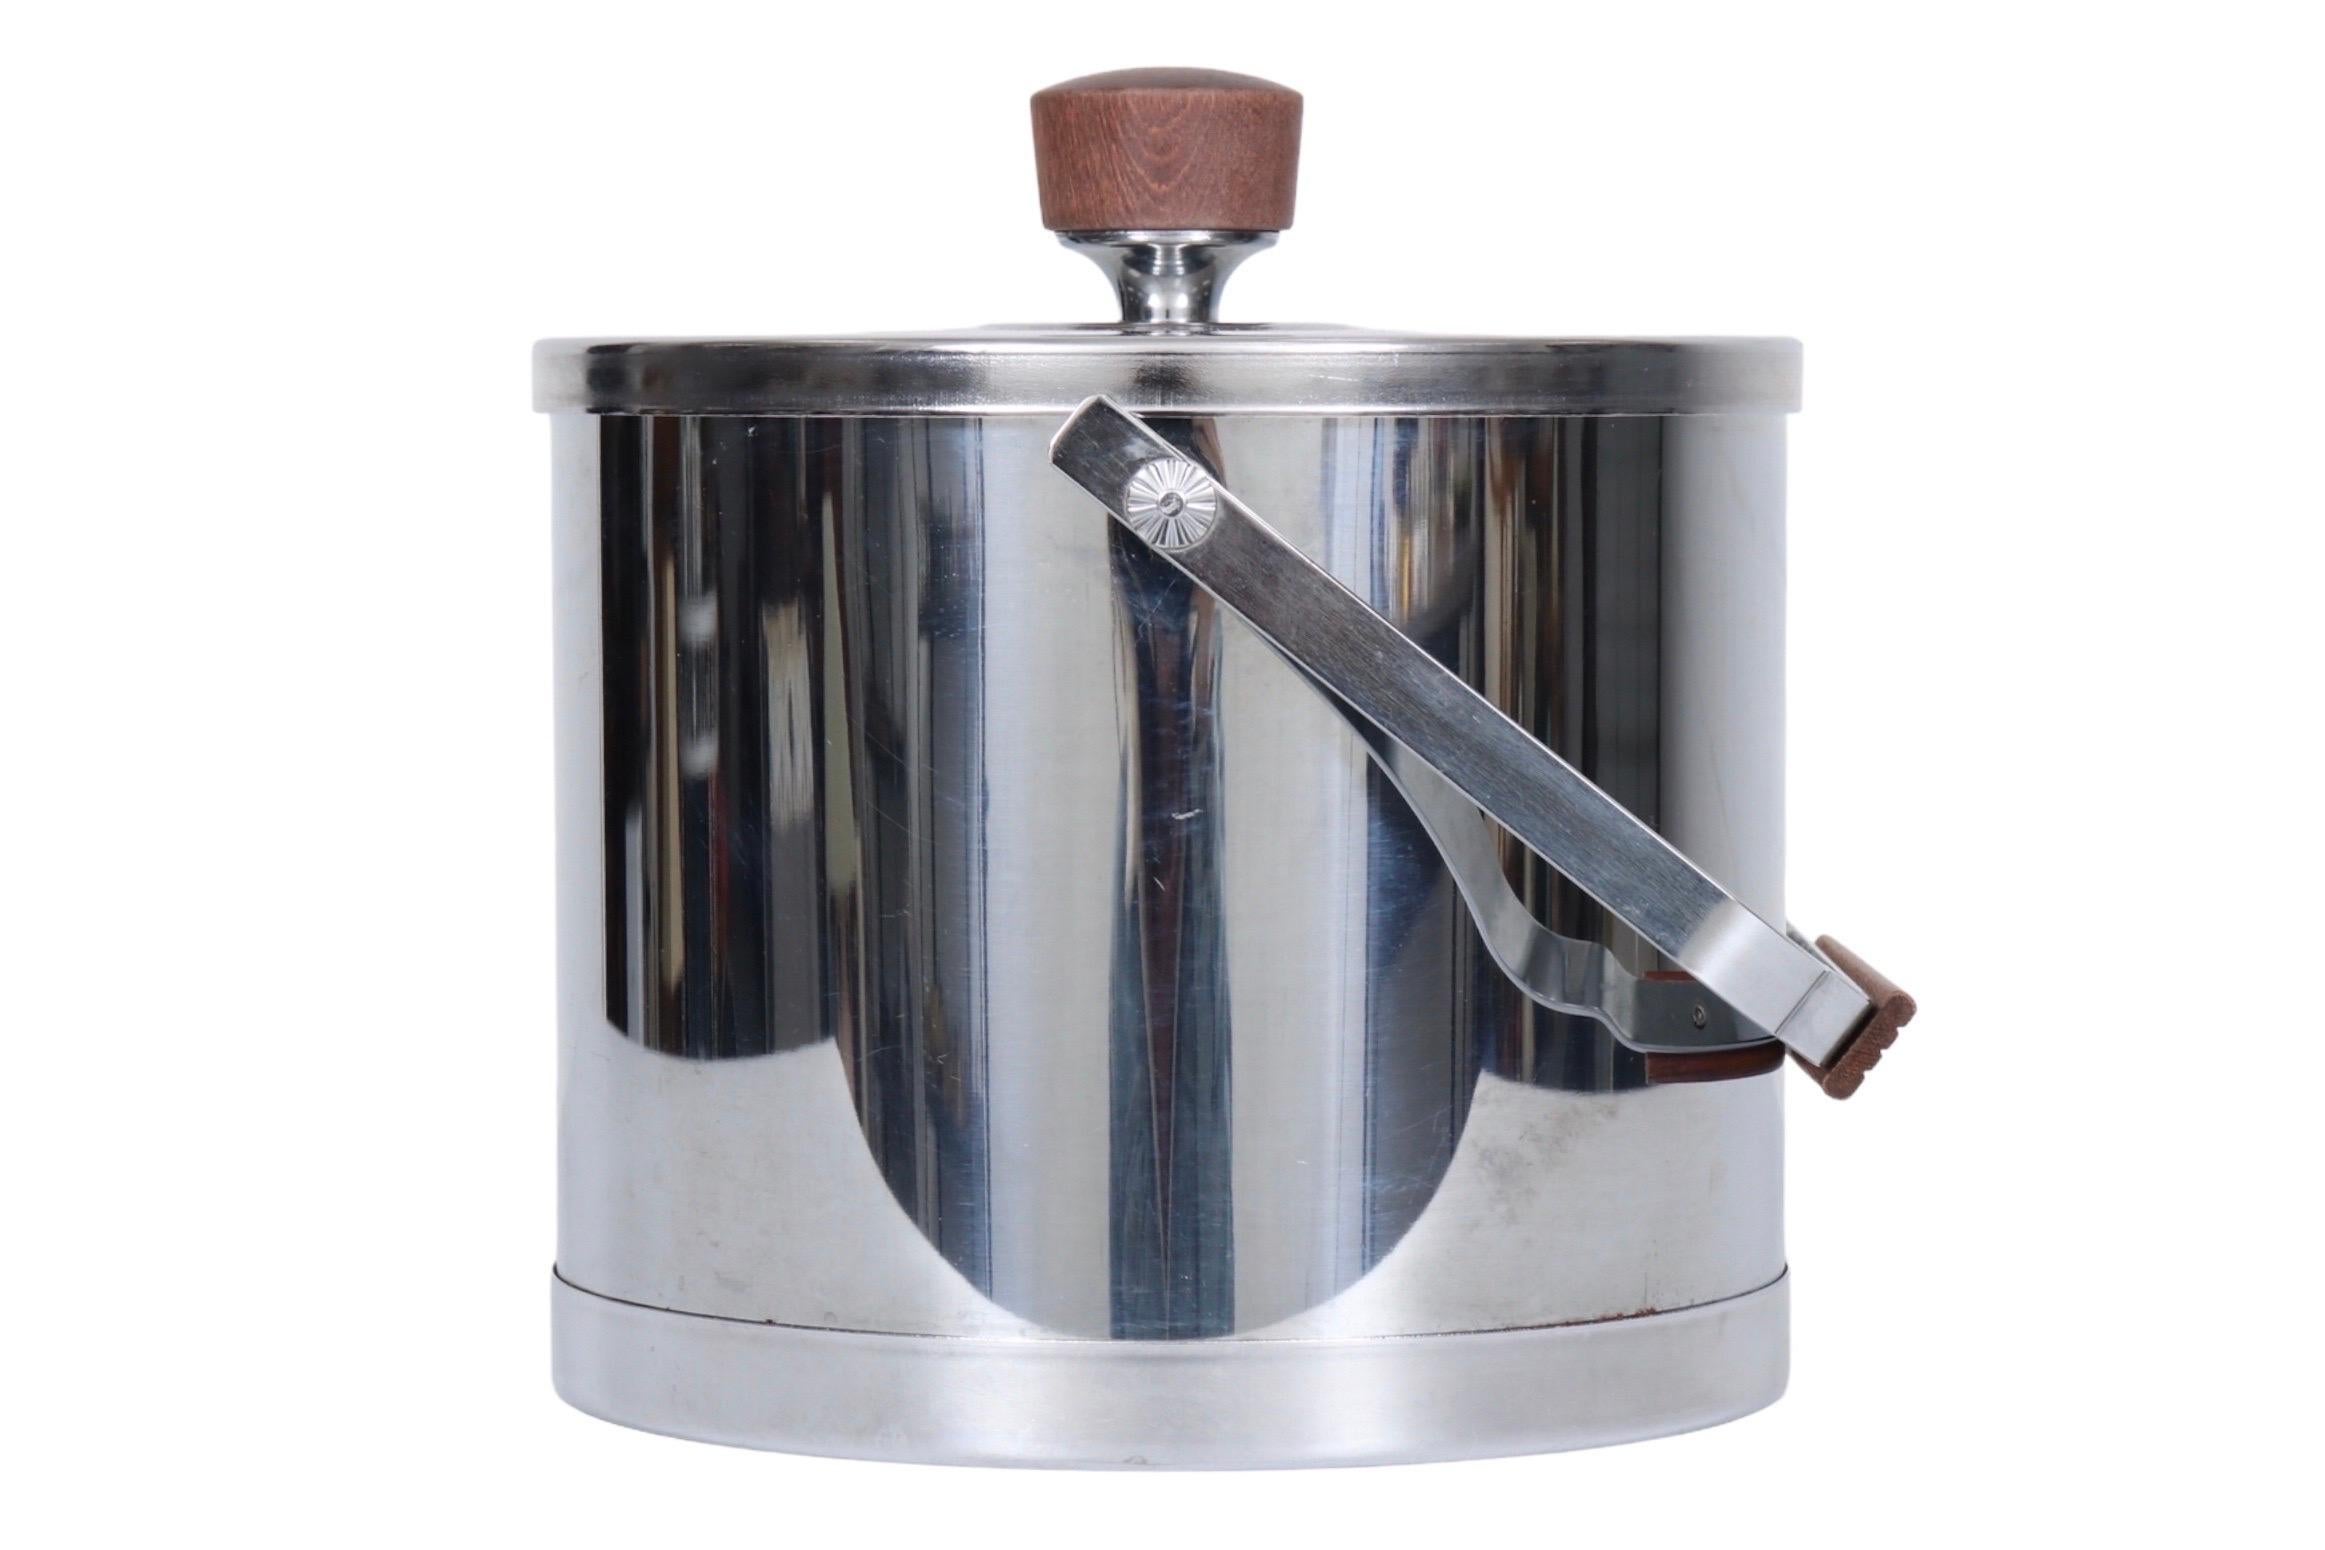 A 1970s mid century modern ice bucket by Atapco. Made of stainless steel with a squared steel handle topped with a teak bar handhold with reeded details. The lid lifts off with a teak knob handle and inside is a plastic liner. Marked 